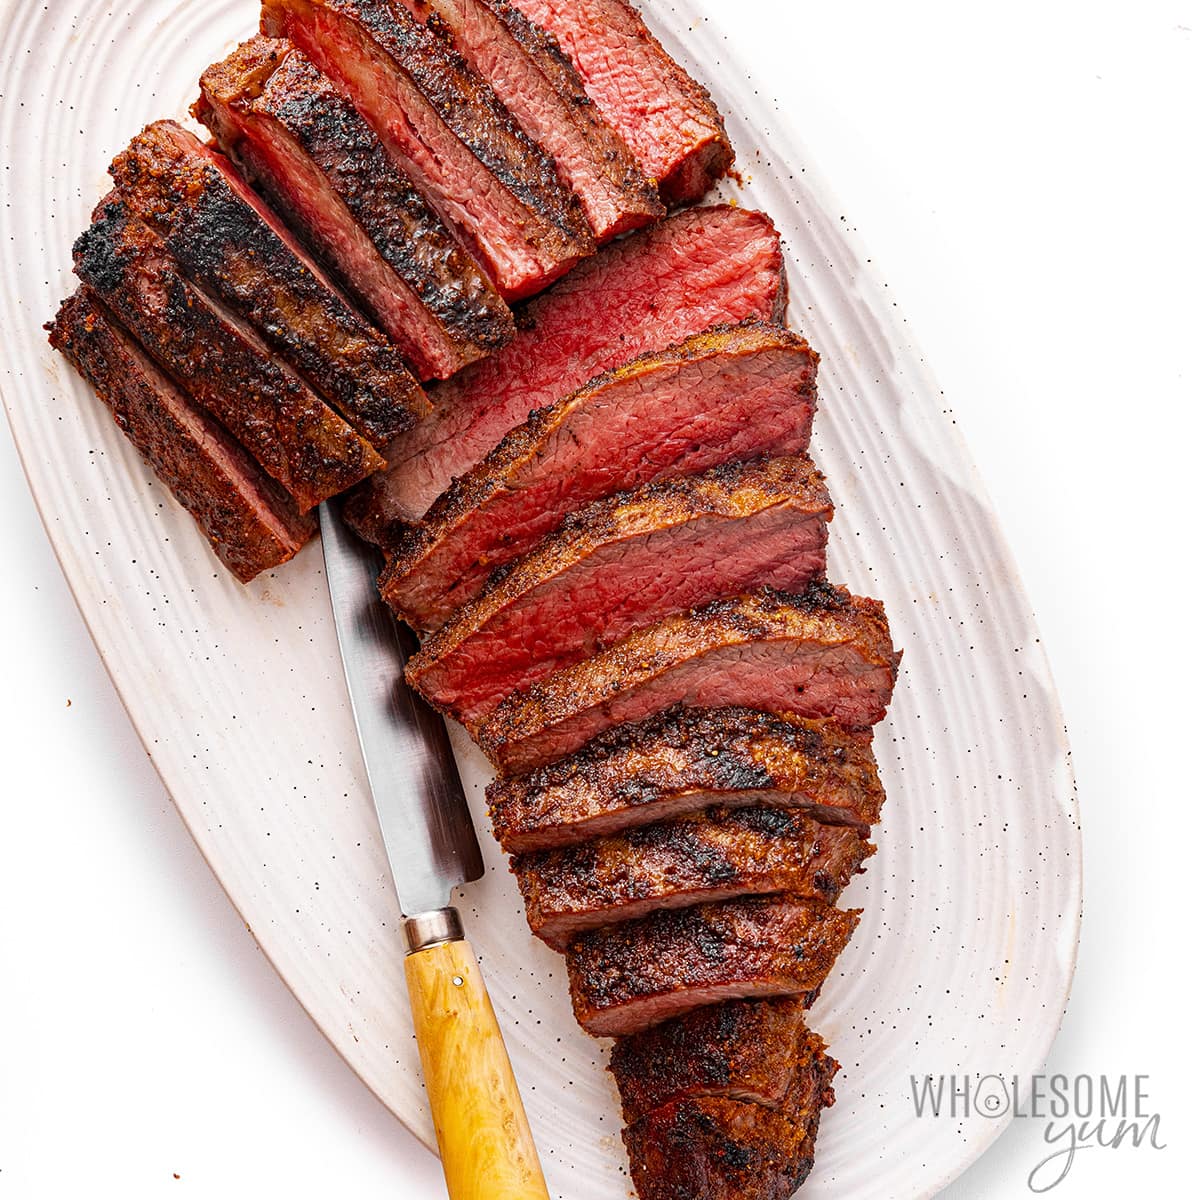 Place roasted tri-tip slices on a plate.